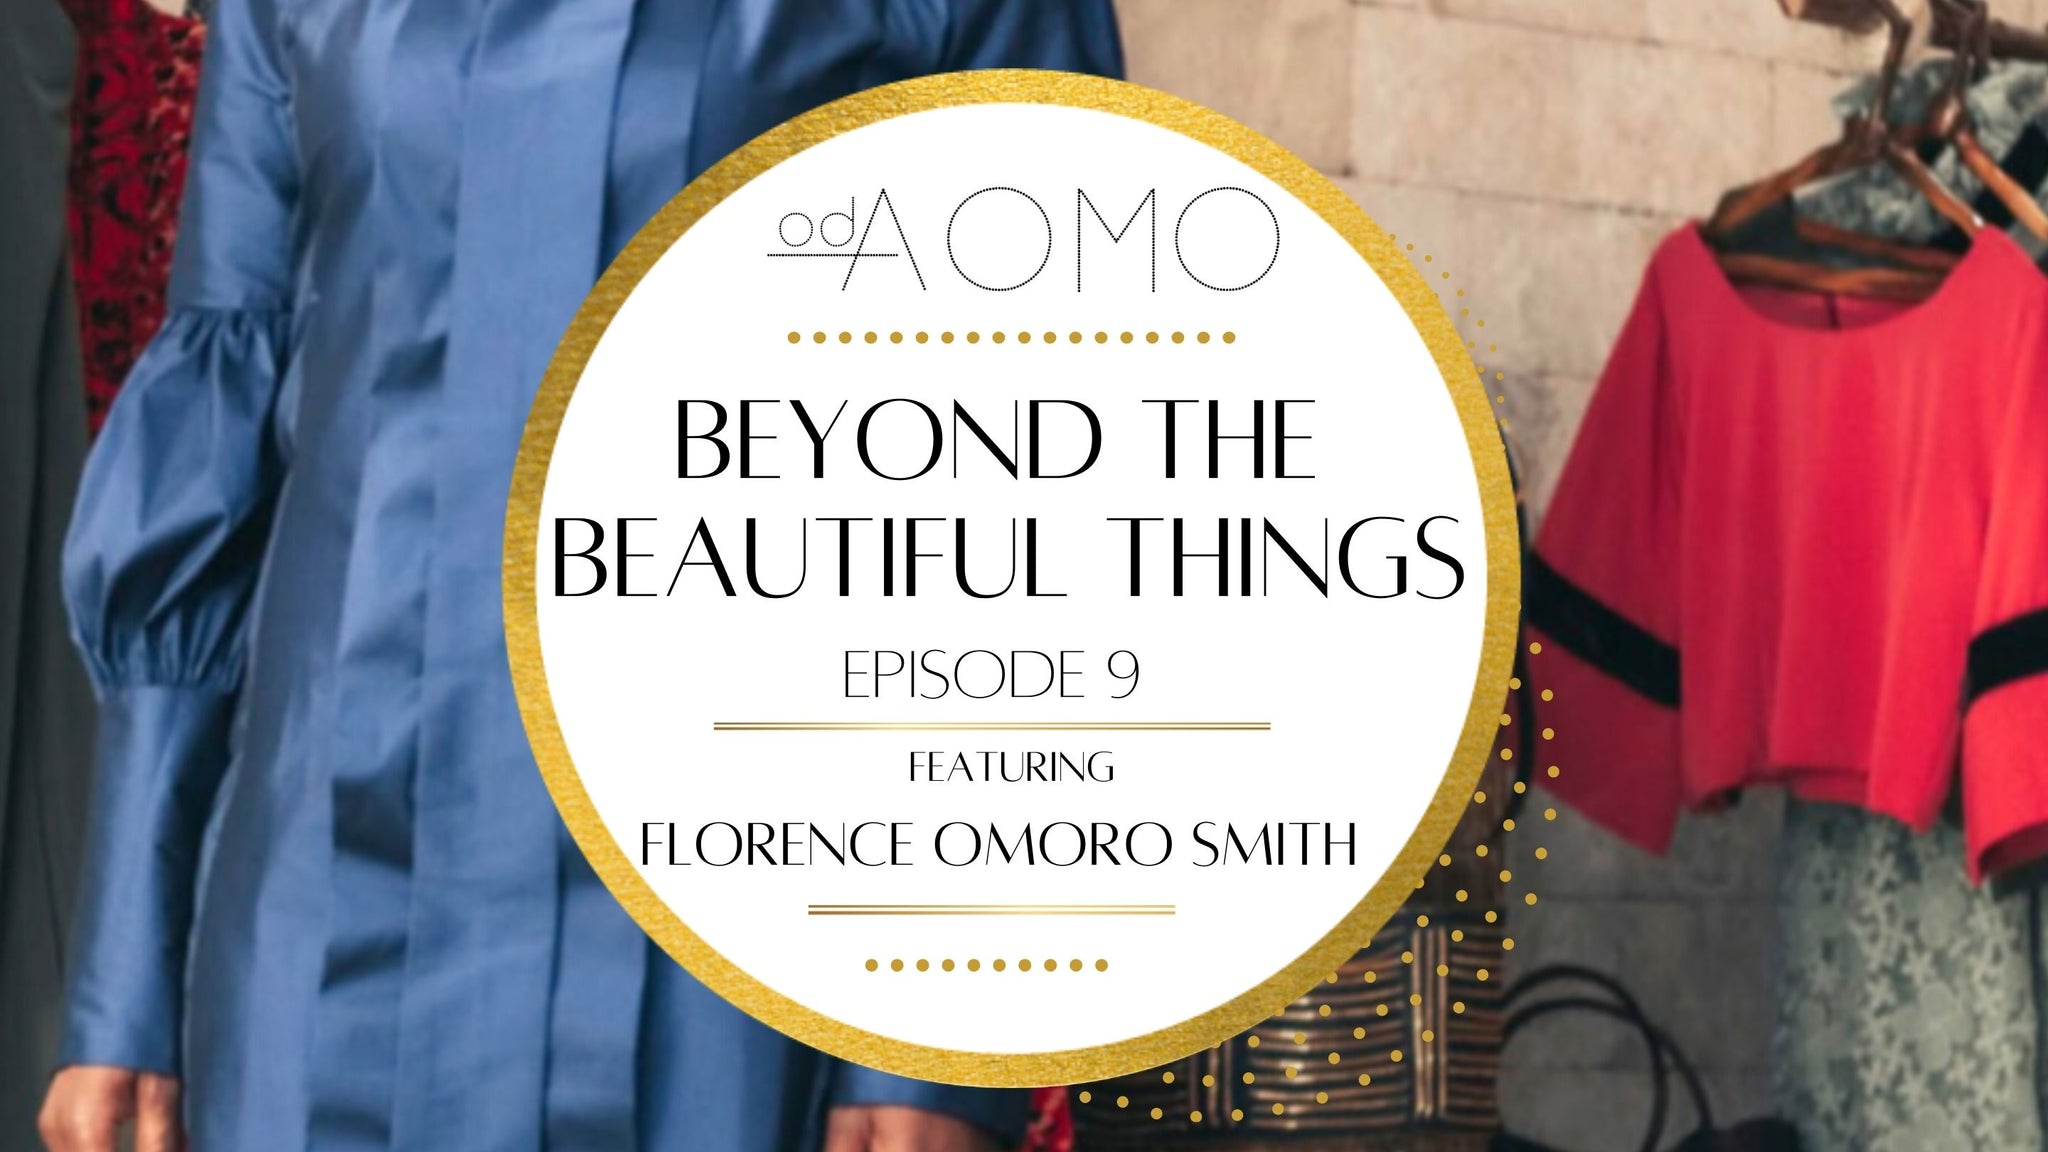 In this episode of Beyond the Beautiful Things, we are introduced to the congenially charming Psychiatric/Mitioner, Florence Omoro Smith.